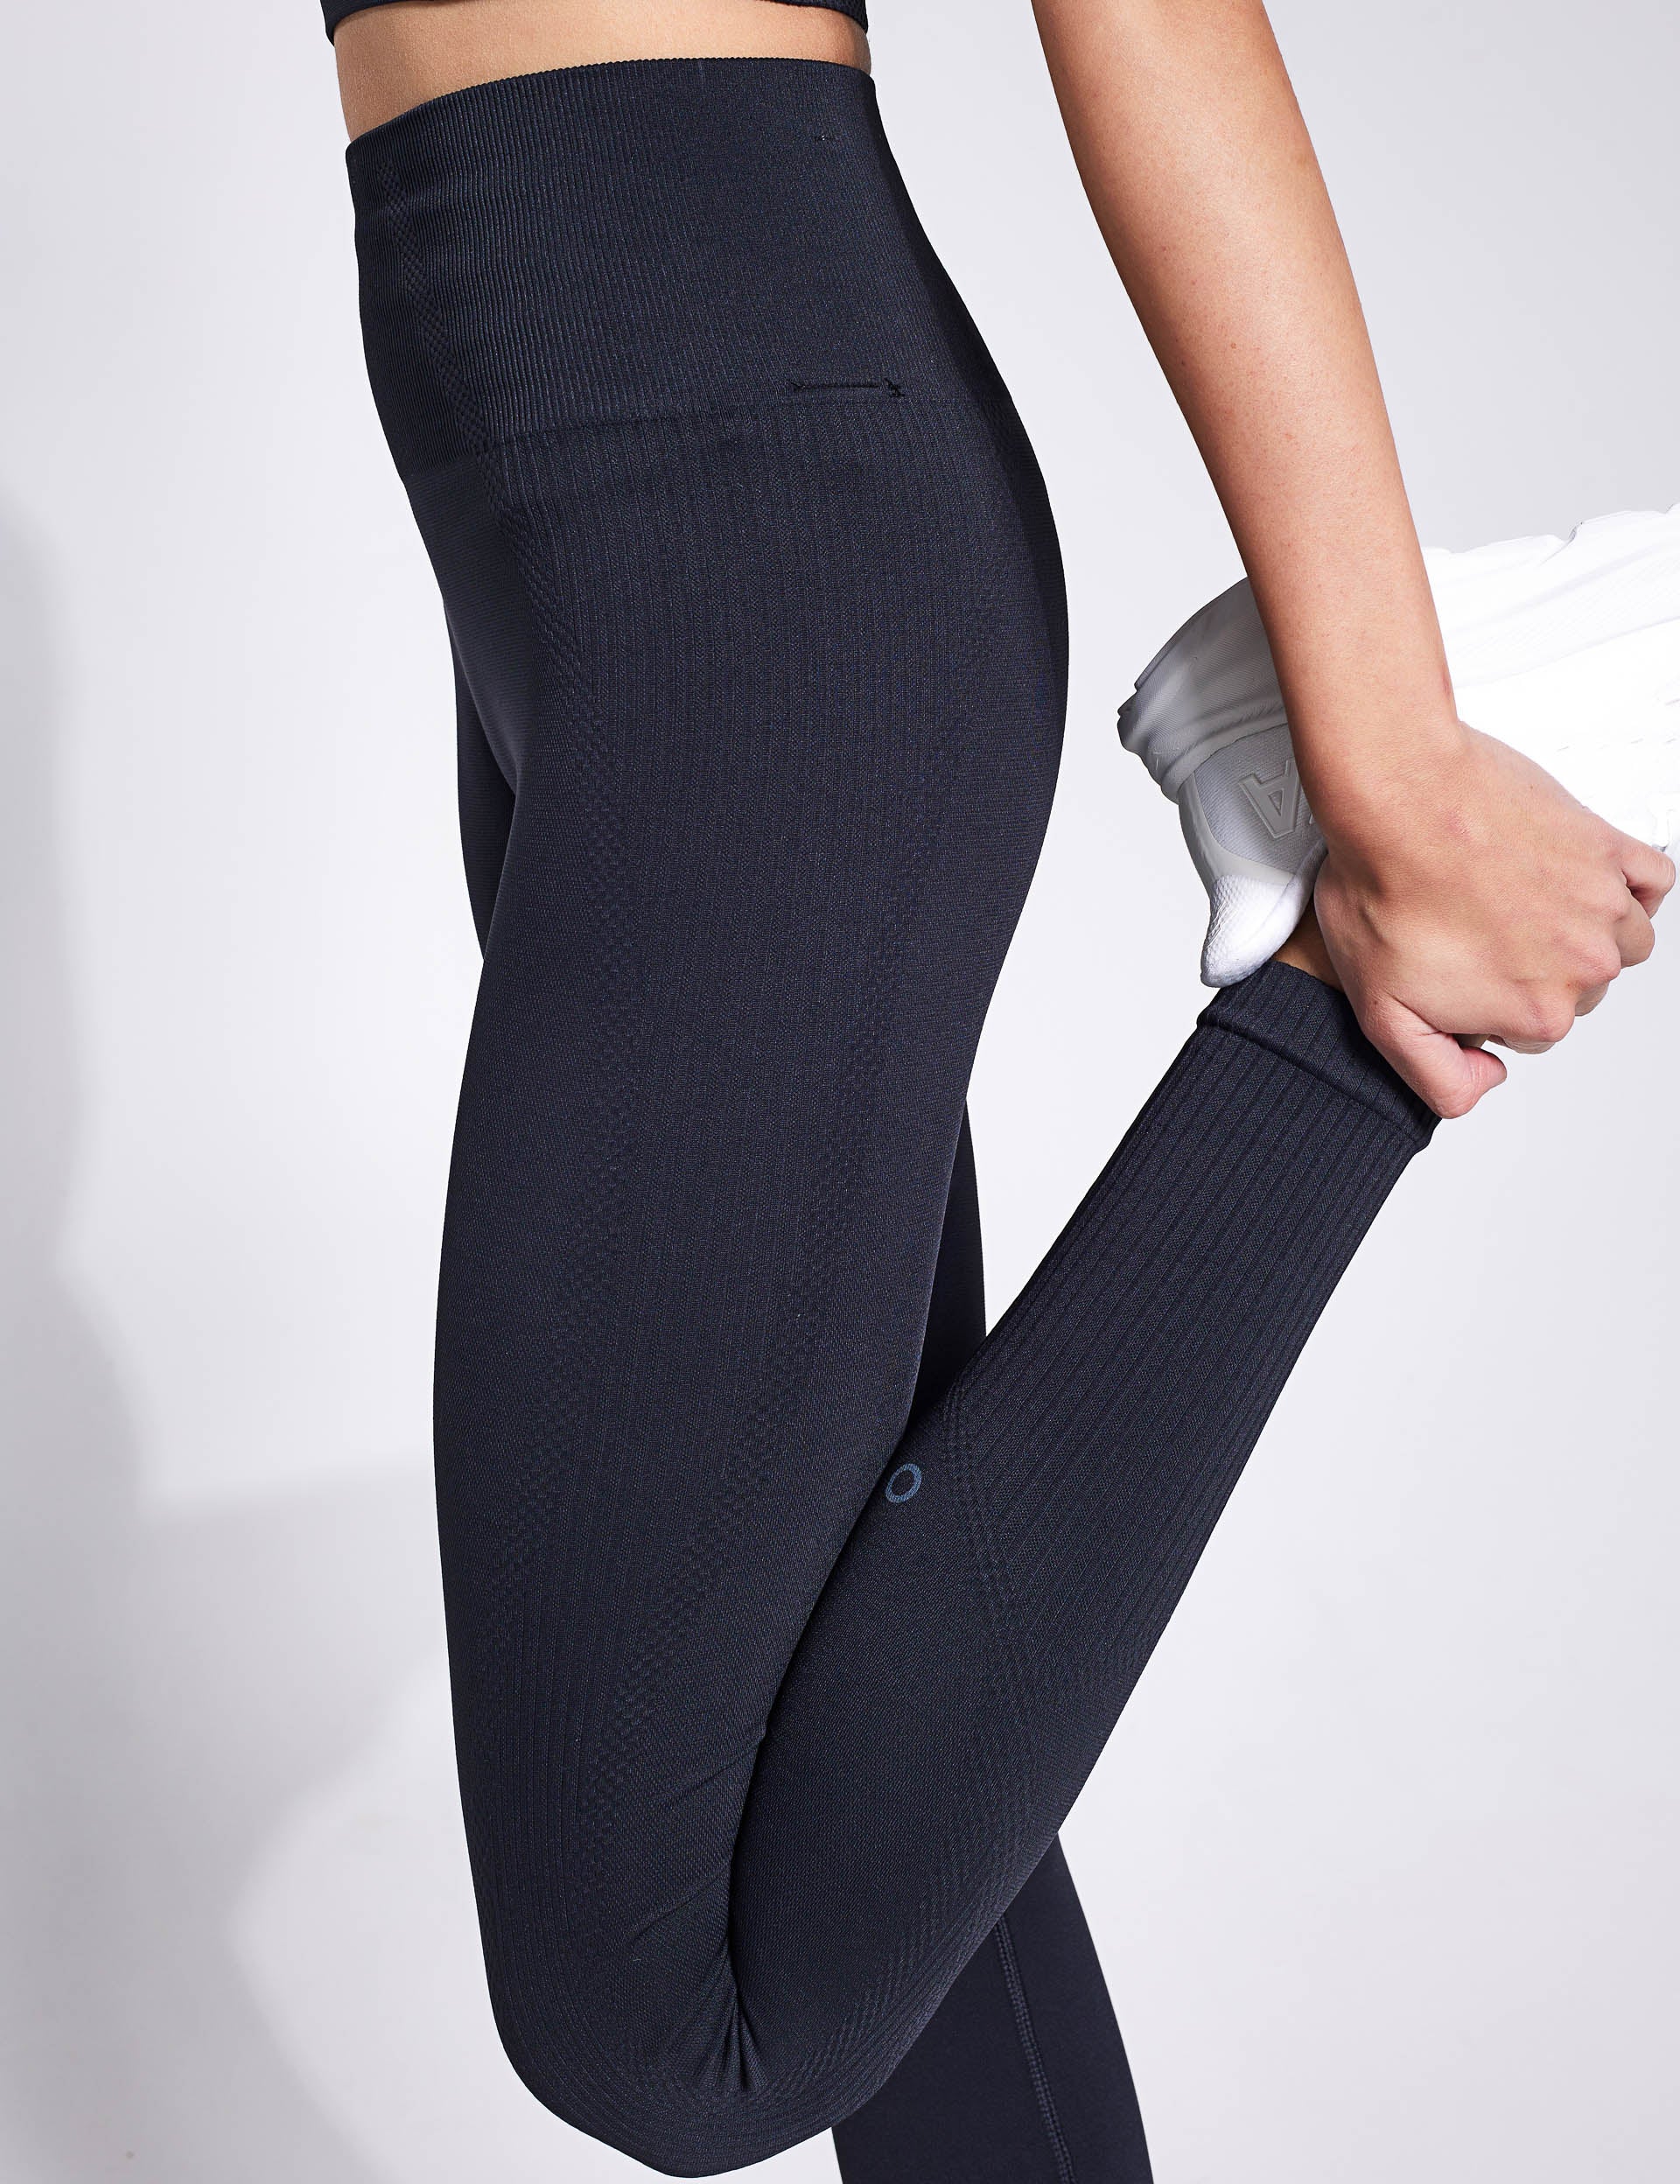 Goodmove Go Seamless Legging - Carbonimages3- The Sports Edit